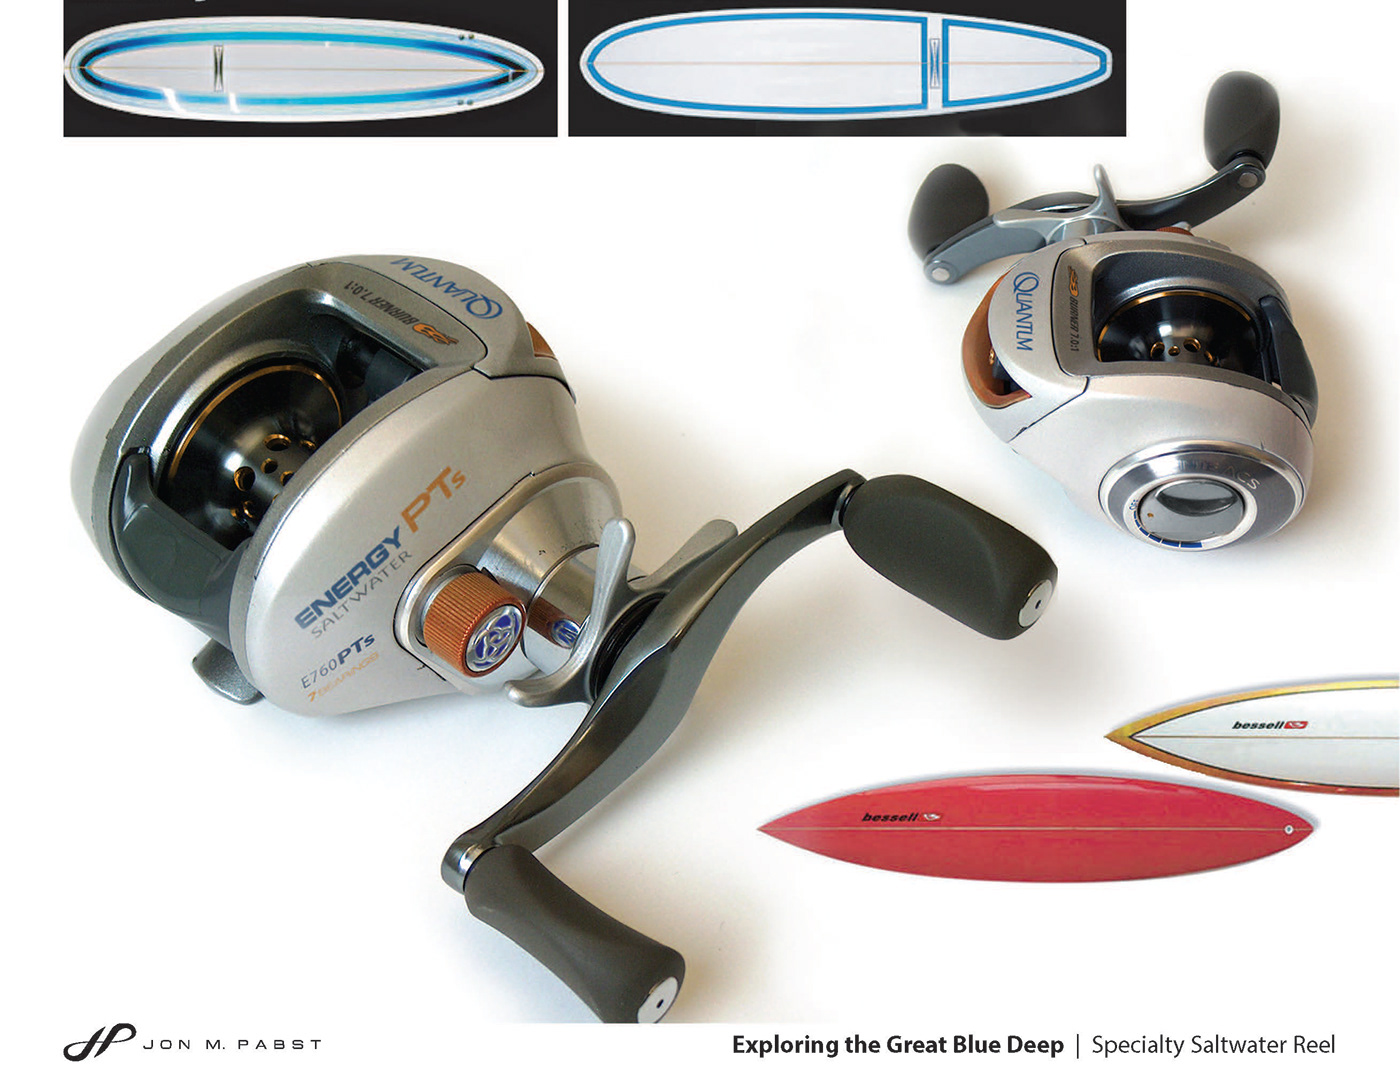 reels Outdoor Gear product design  fishing sporting goods